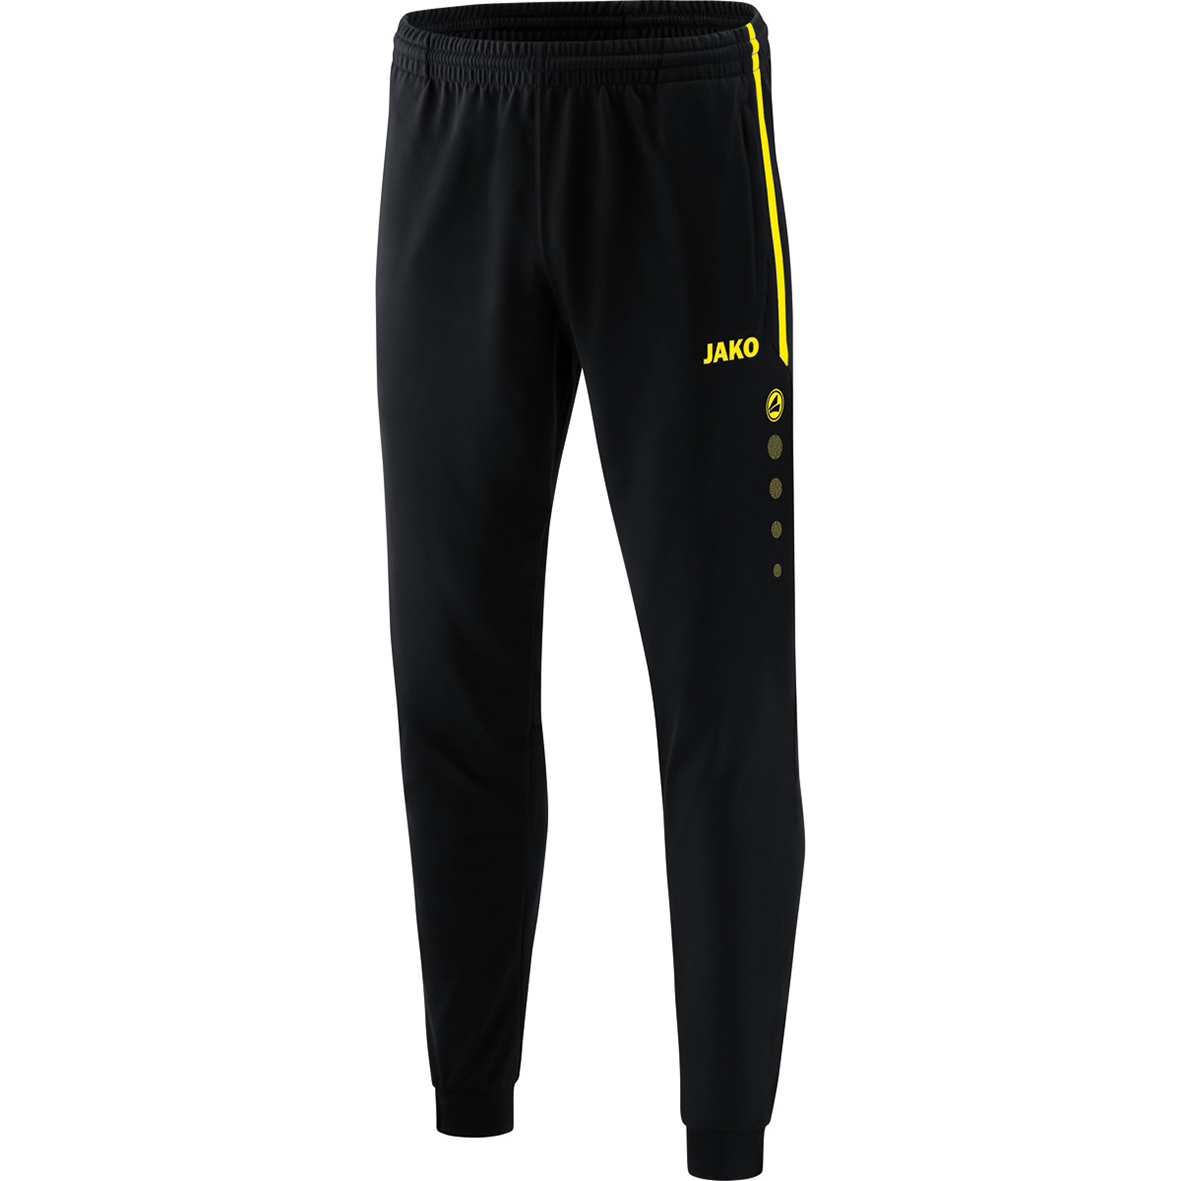 TROUSERS JAKO COMPETITION 2.0, BLACK-nNEON YELLOW MEN.